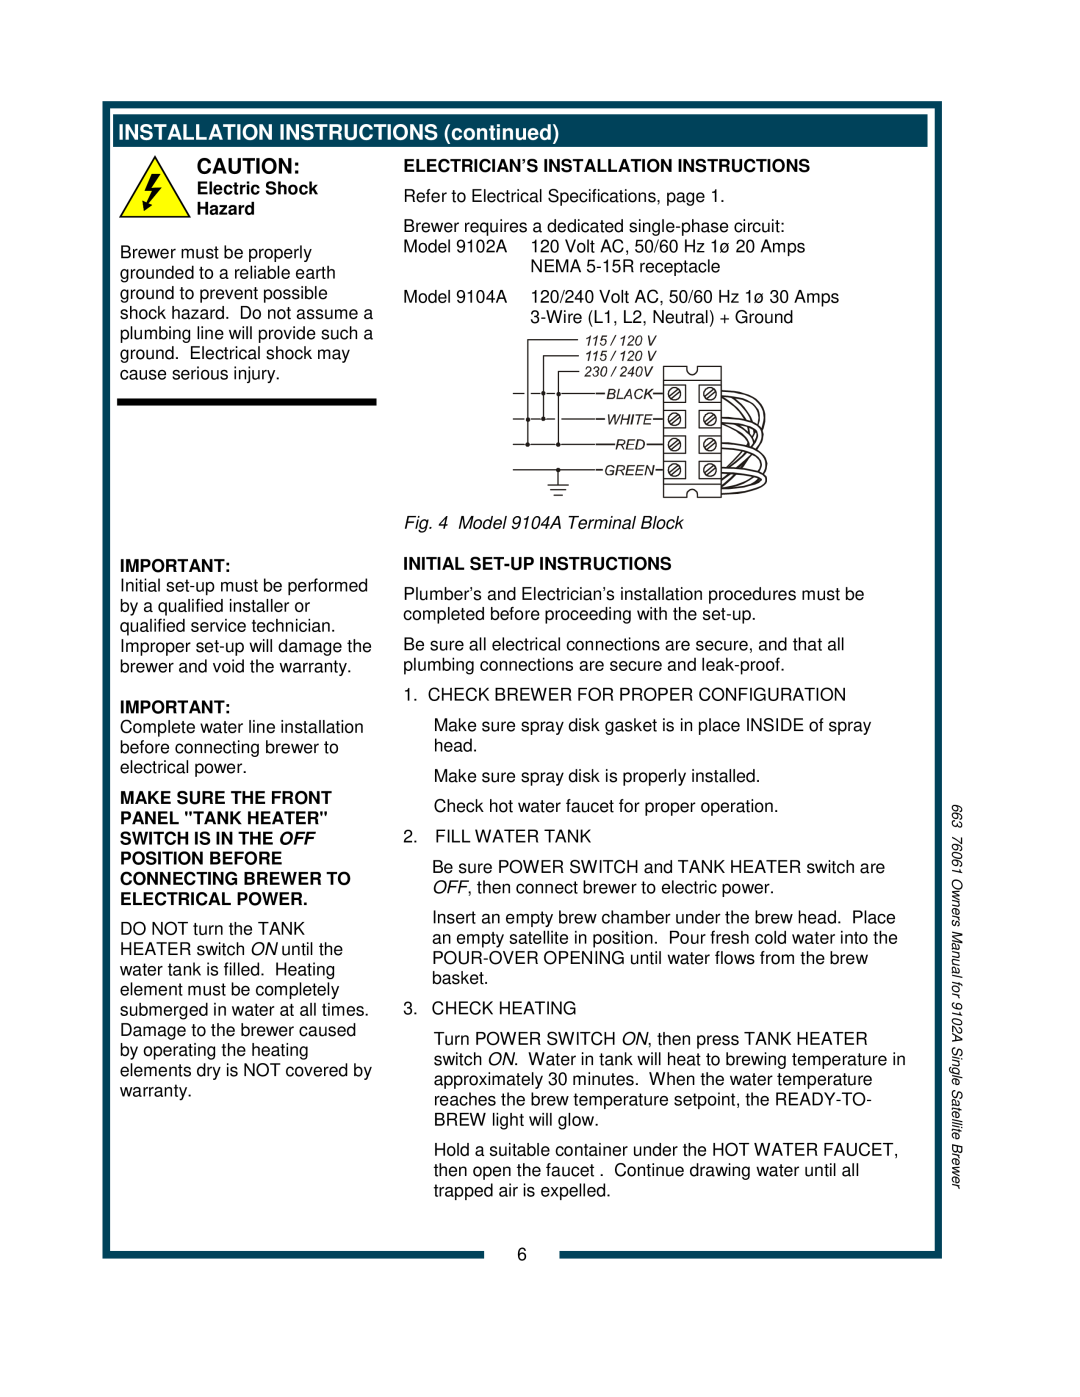 Bloomfield 9102A INSTALLATION INSTRUCTIONS continued, Electric Shock Hazard, Electrician’S Installation Instructions 